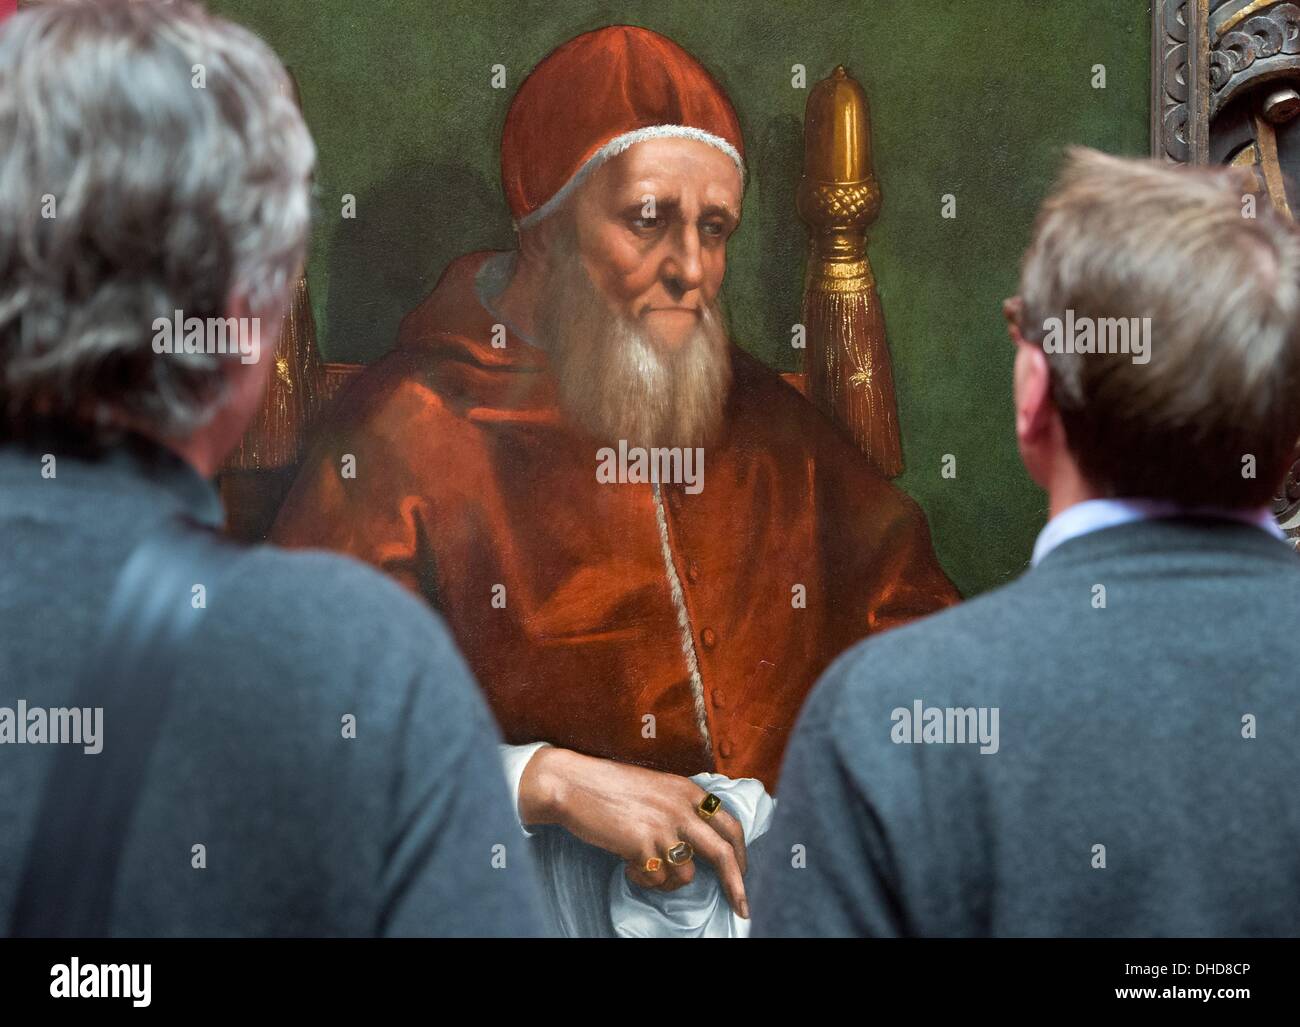 Frankfurt Main, Germany. 07th Nov, 2013. Visitors look at a portrait of Pope Julius II at the Staedel museum in Frankfurt Main, Germany, 07 November 2013. The Staedel Museum acquired the hitherto unknown version of the Portrait of Pope Julius II by Raphael and his workshop, which will be addressed in a showcase exhibition from 08 November 2013 to 16 February 2014. Photo: BORIS ROESSLER/dpa/Alamy Live News Stock Photo